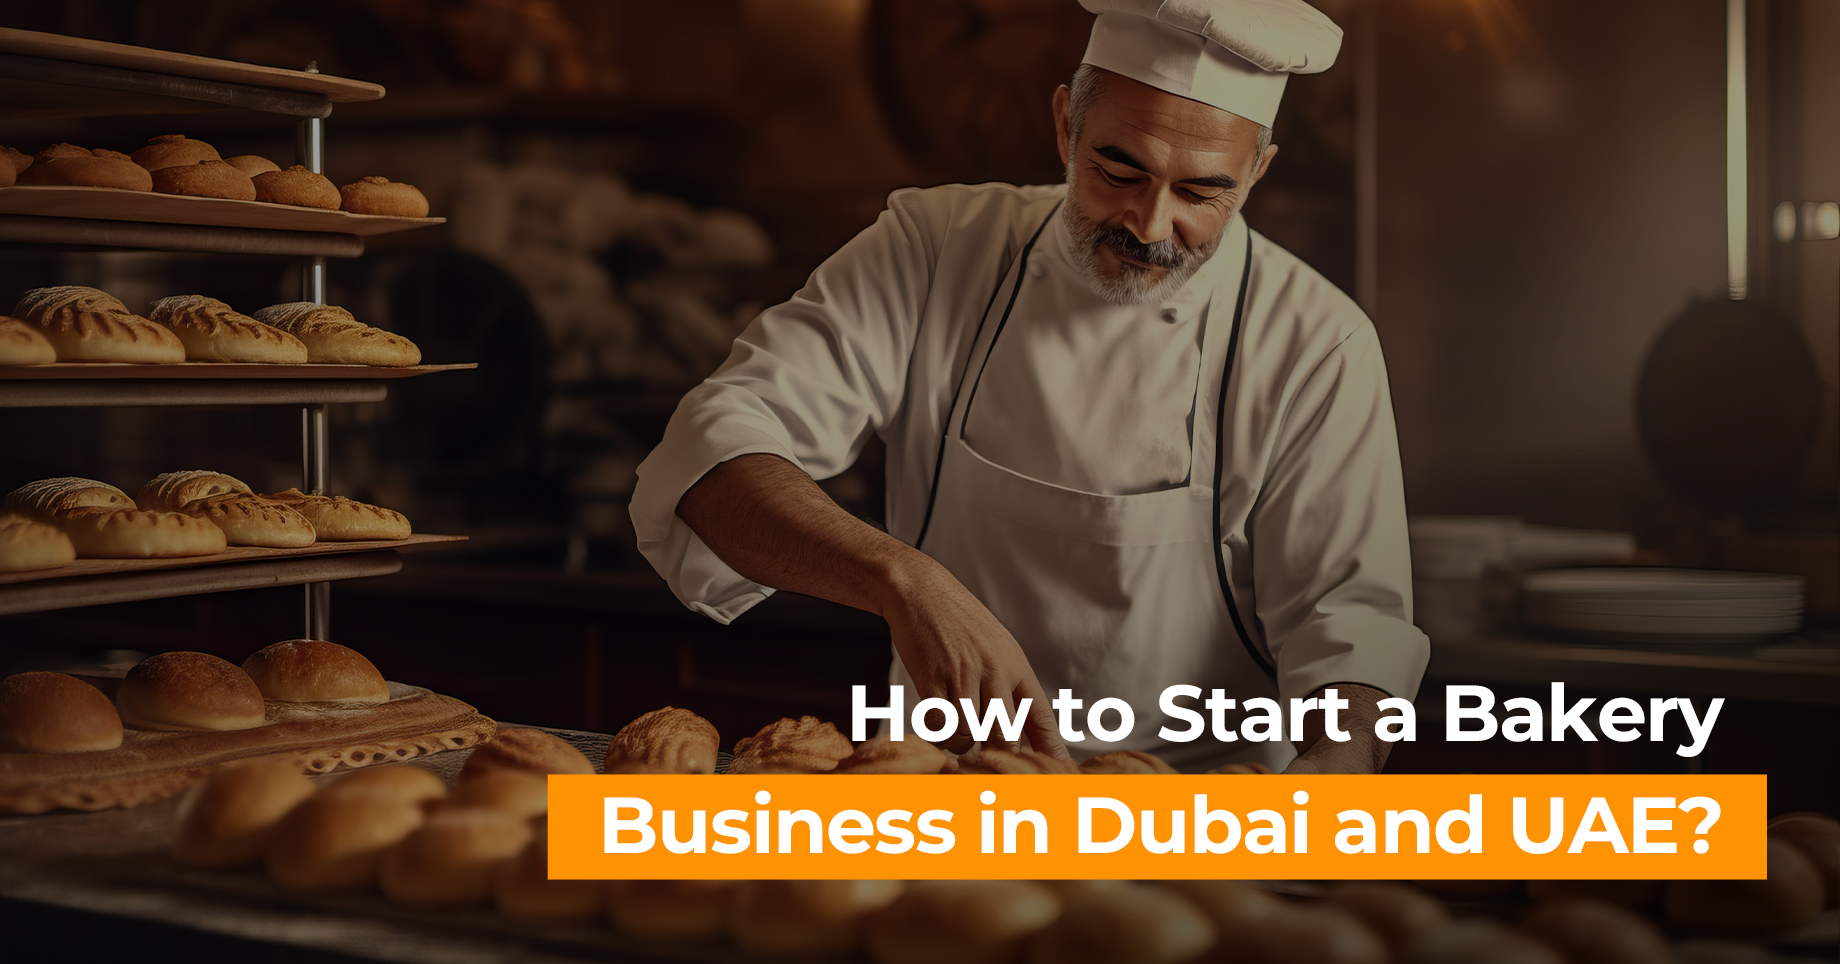 How to Start a Bakery Business in Dubai and UAE?